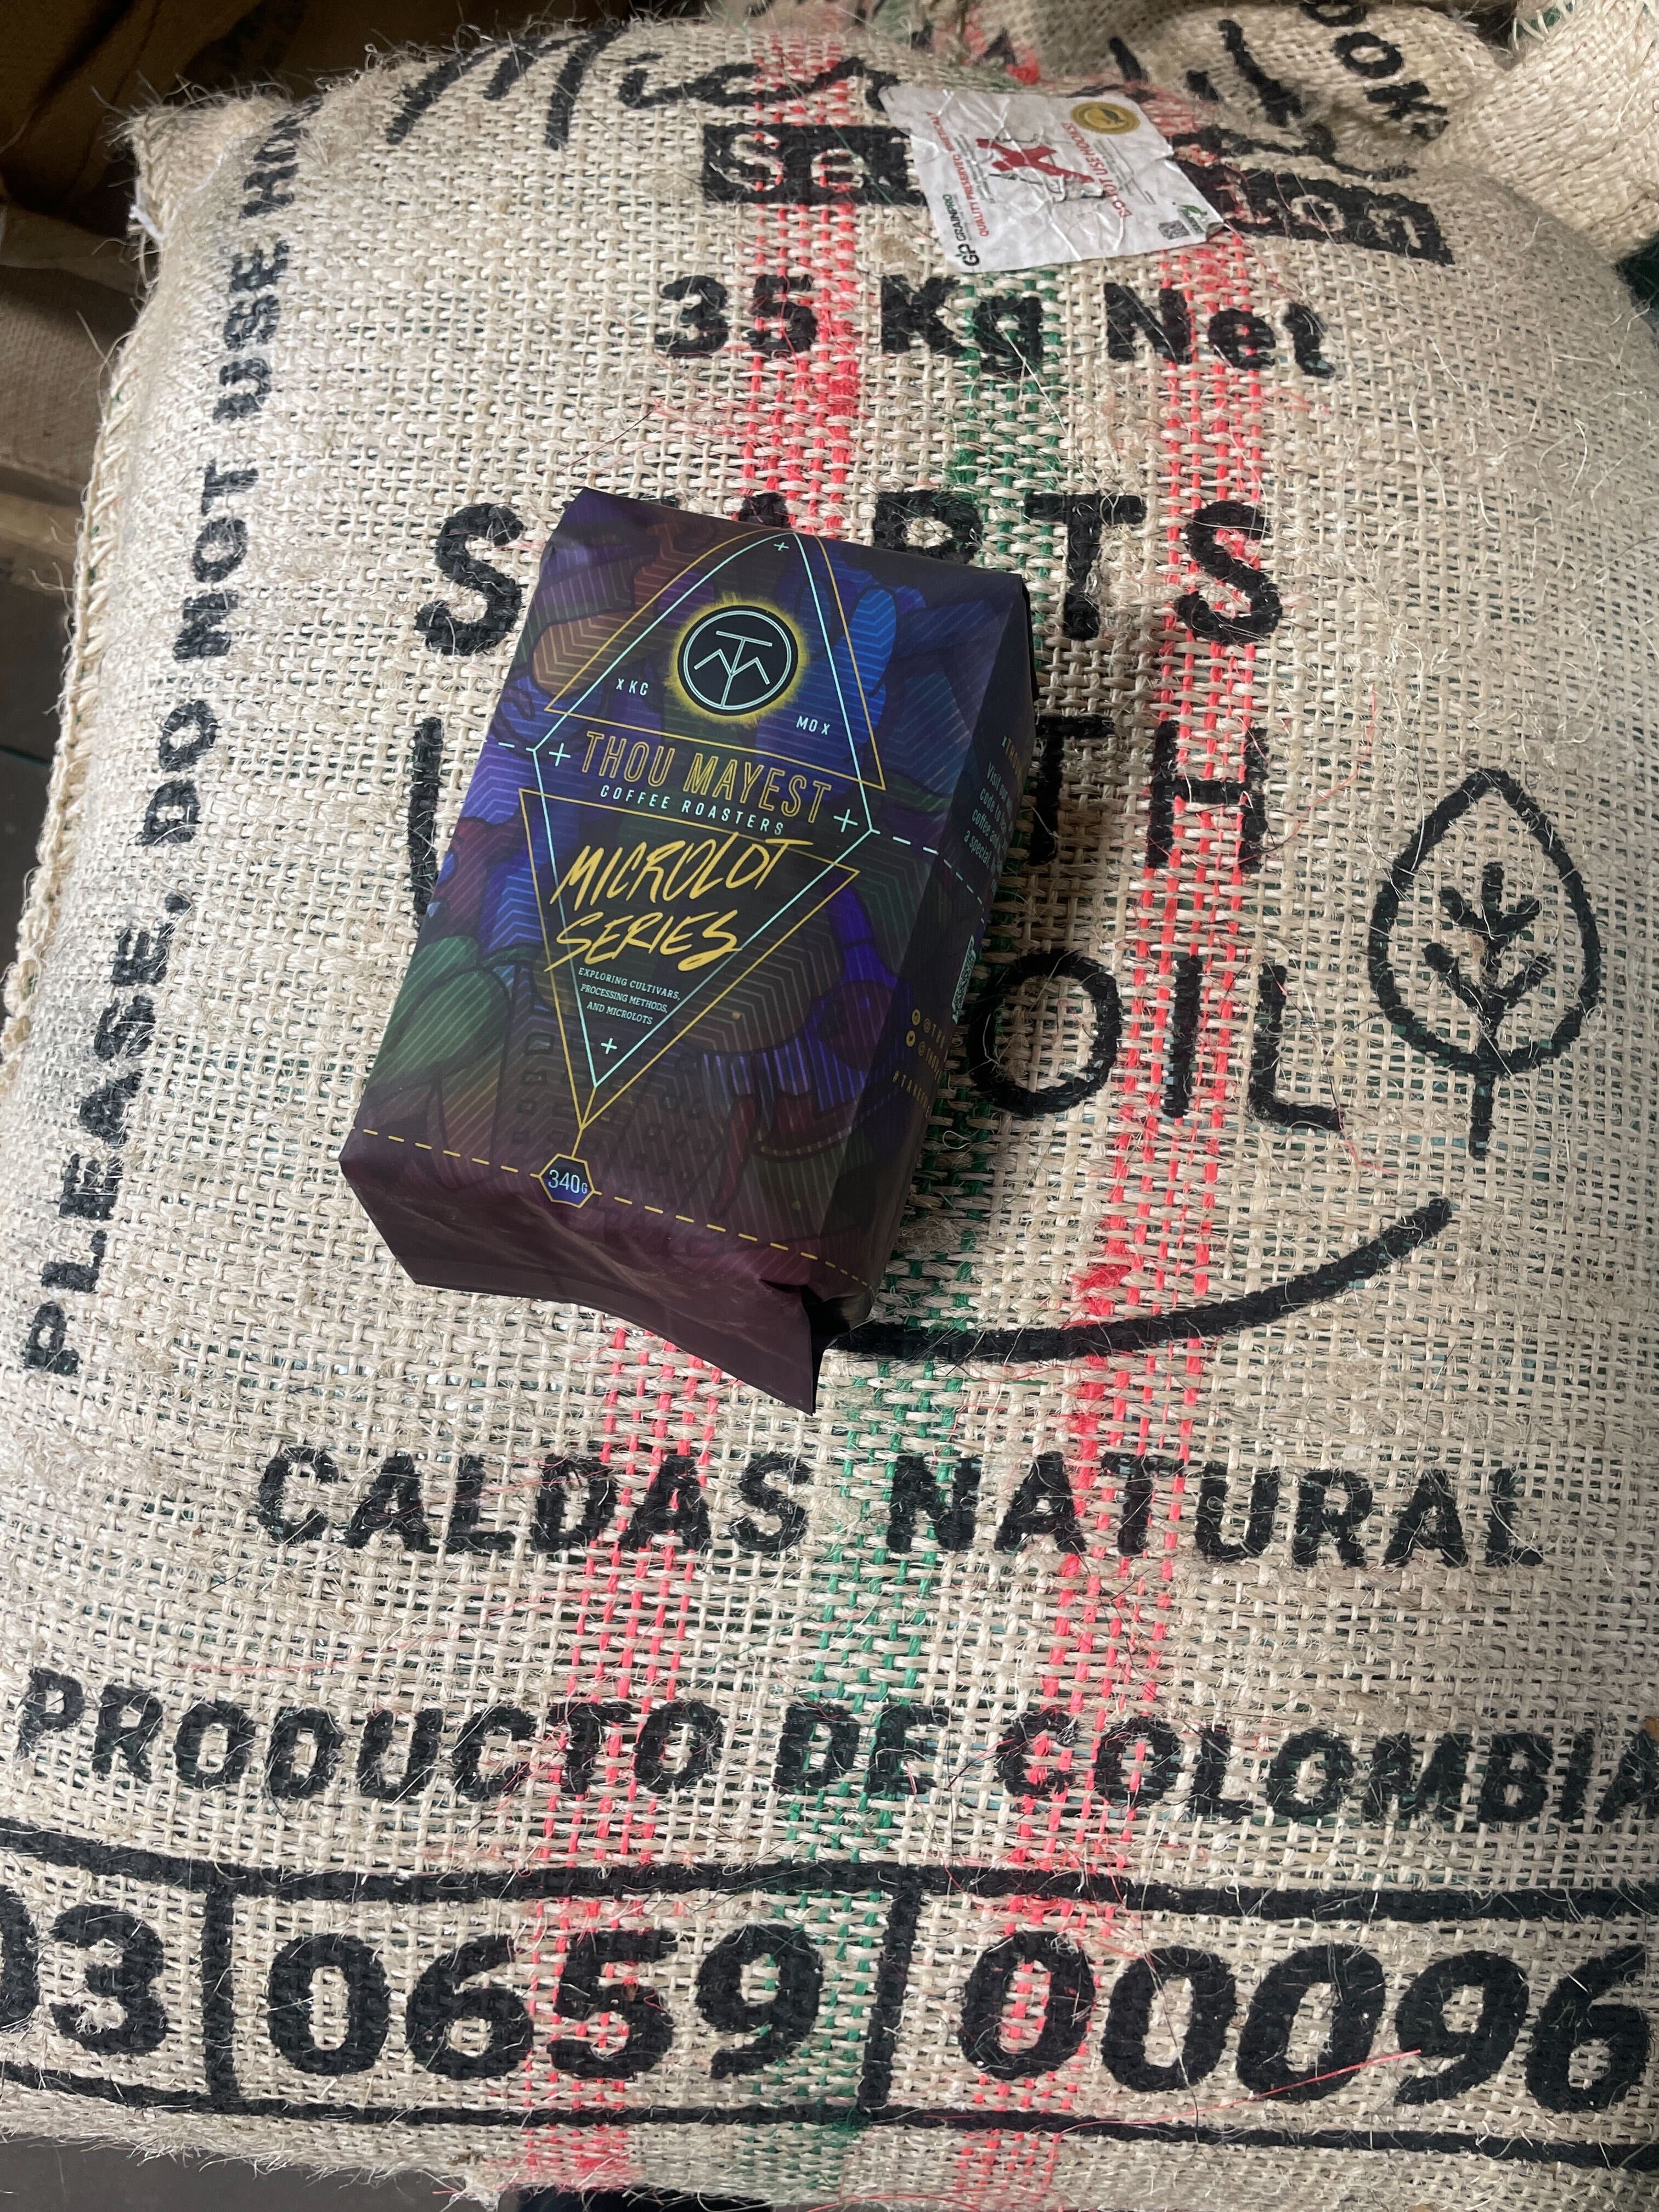 Microlot Series No 1: Natural Colombia - Controlled Fermentation